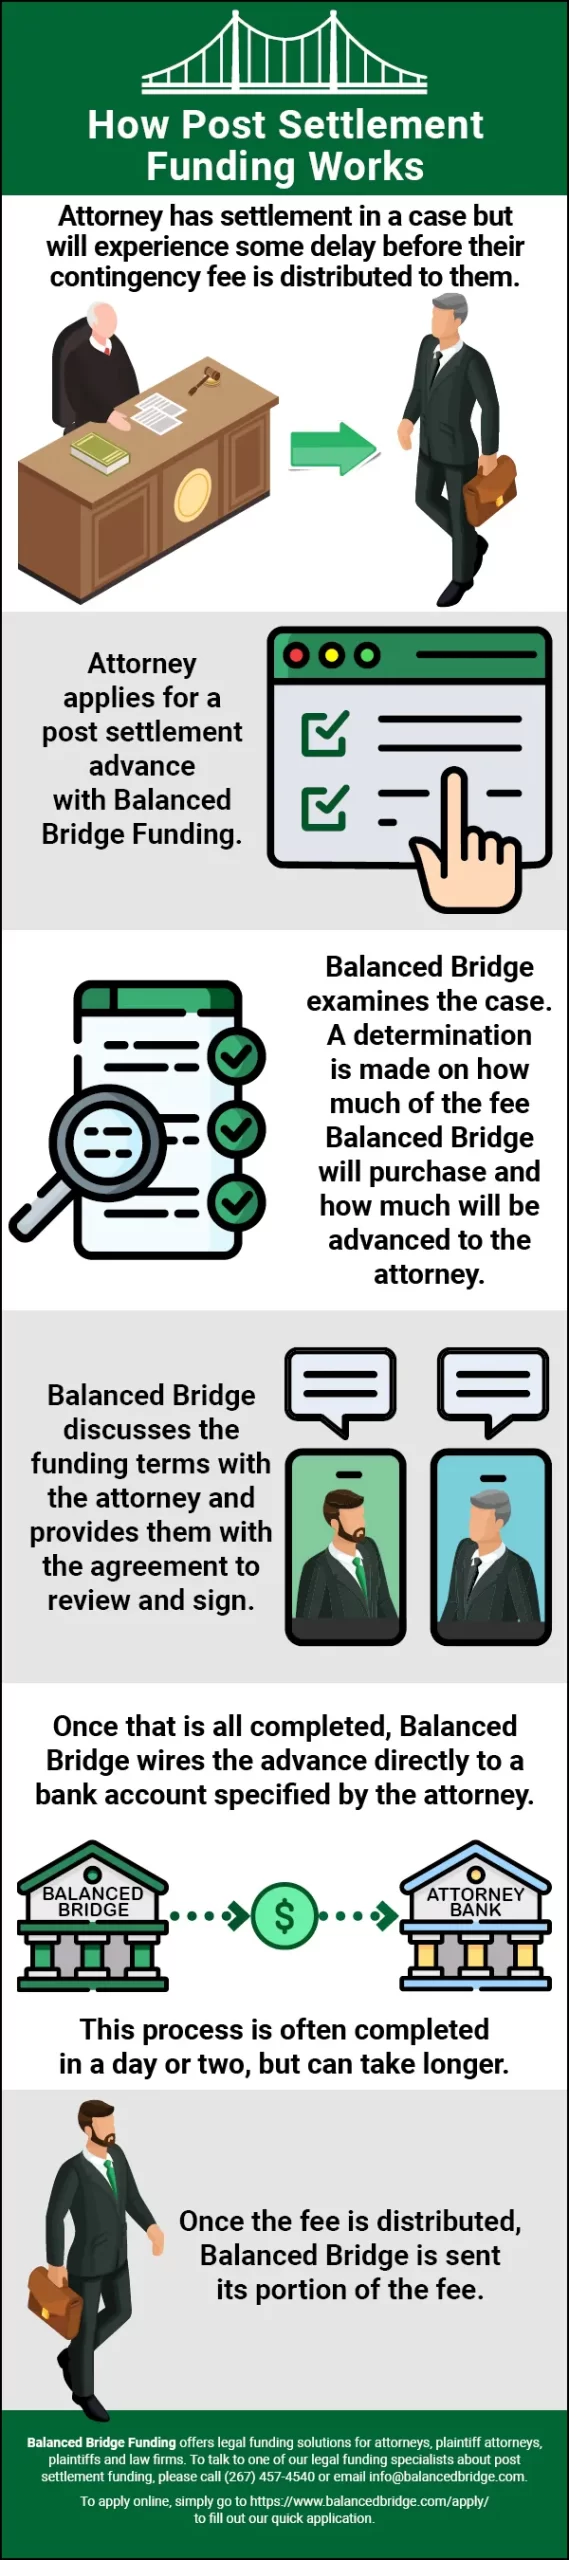 how legal funding has leveled  the playing field - an infographic of how post settlement funding works.webp